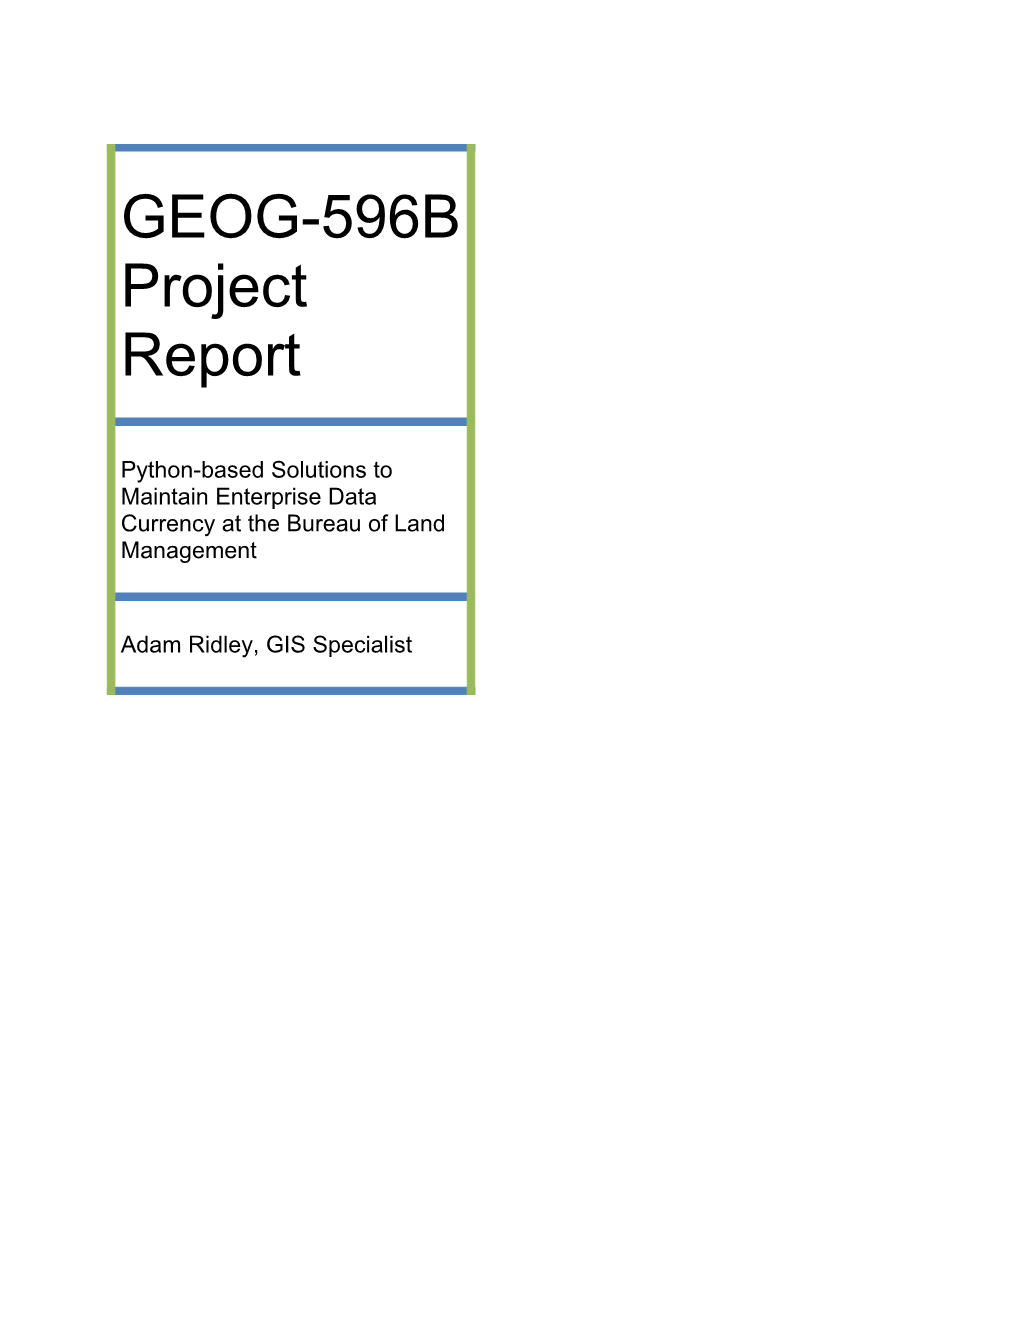 GEOG-596B Project Report